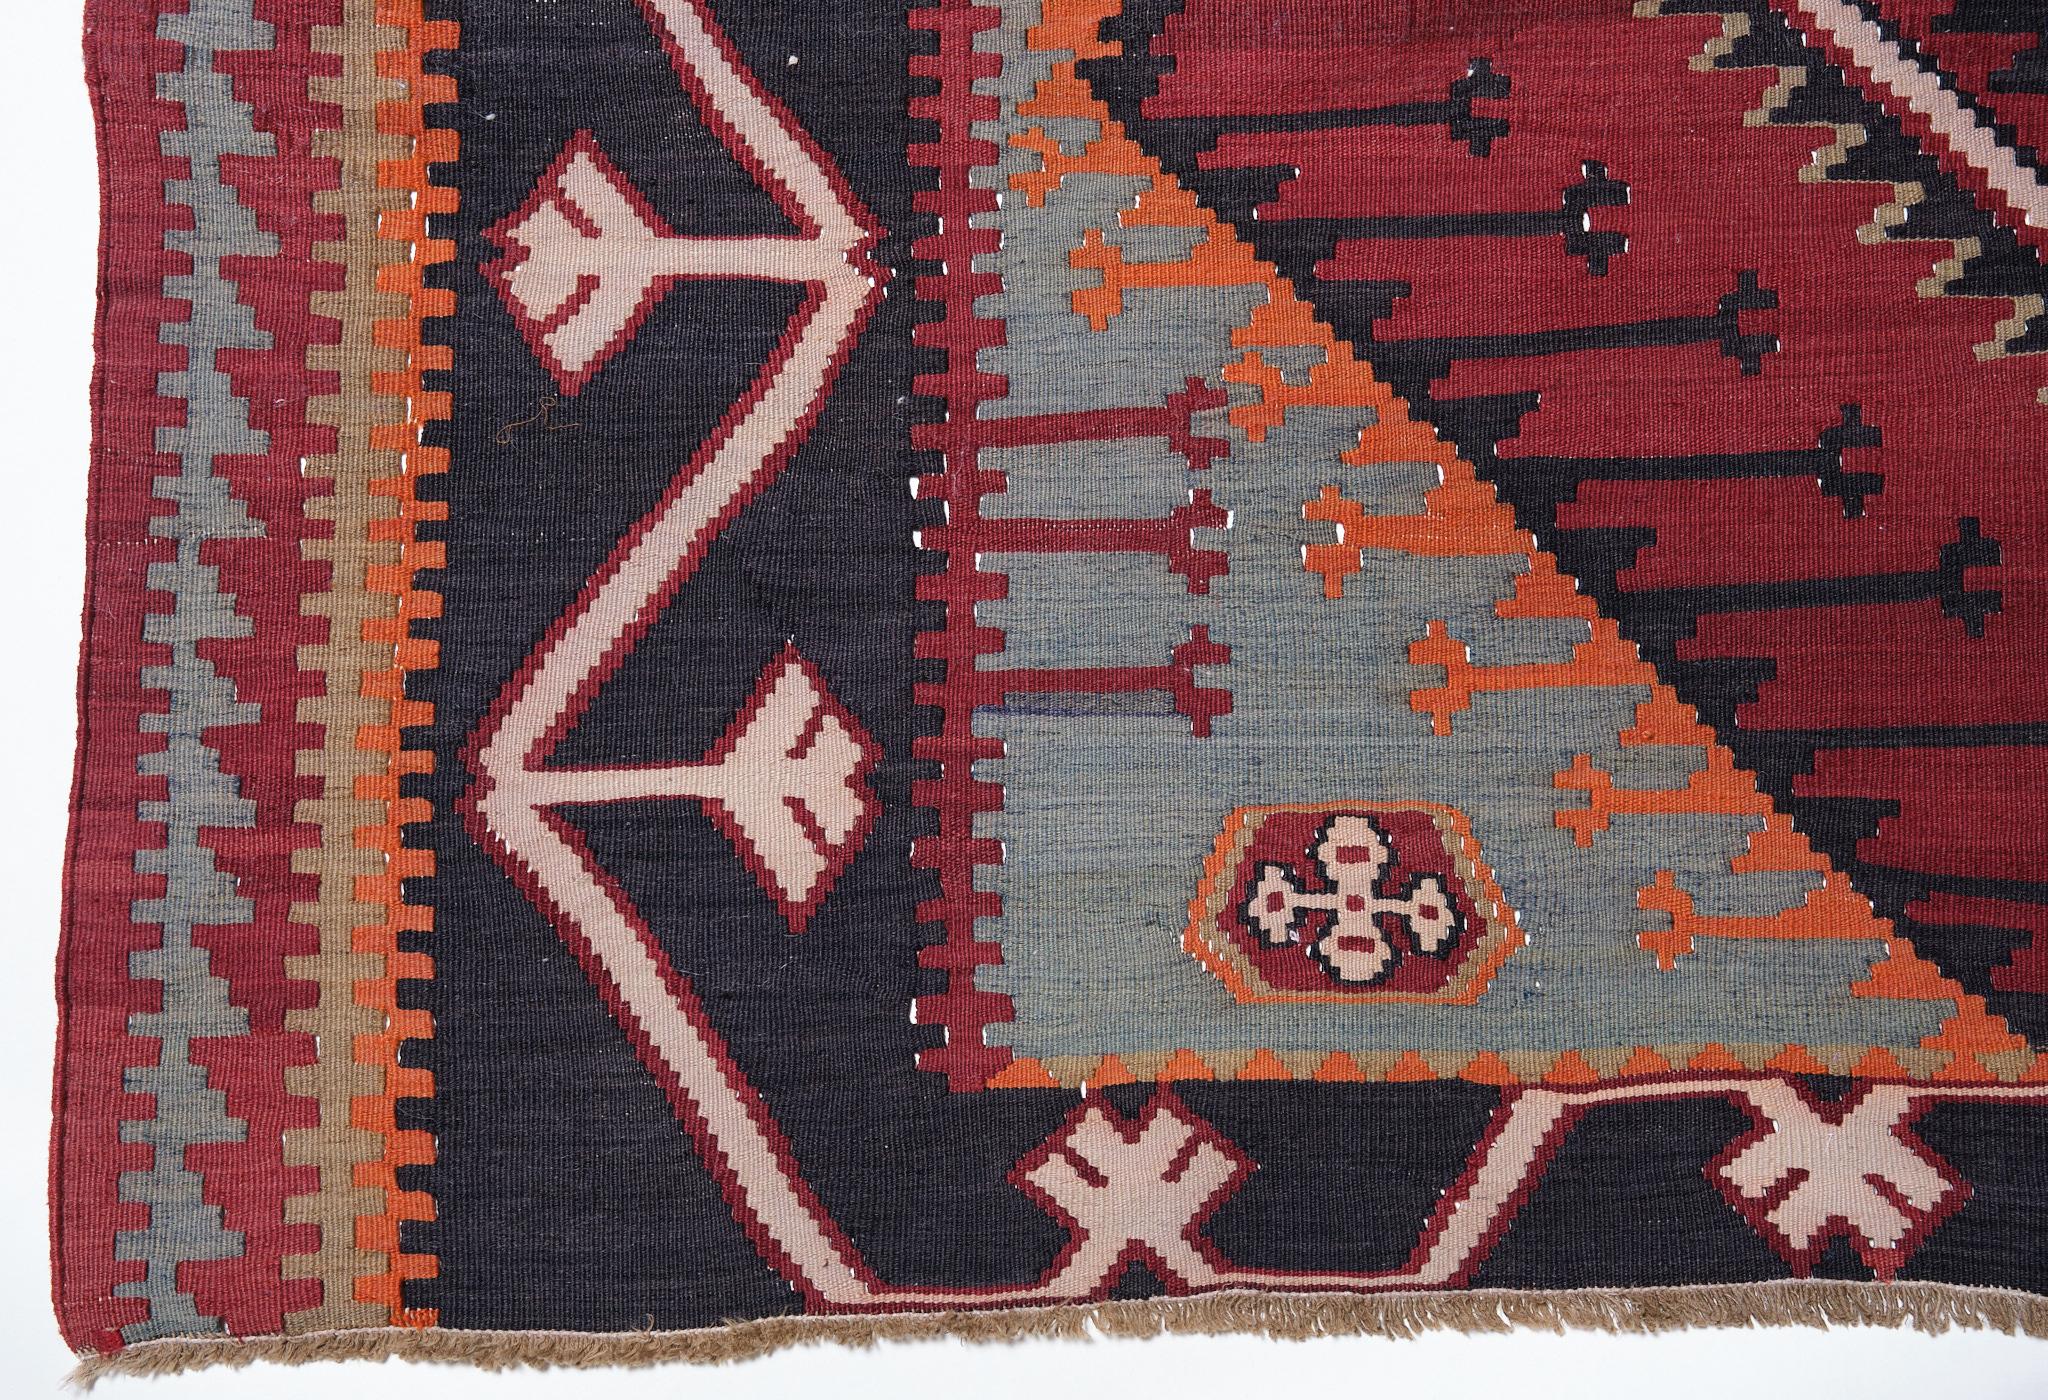 This is a large, Caucasian Old Kilim from the Kuba region with a red background and beautiful color composition.

The large, continuous medallions with zigzag patterns have an impact. Both the left and right borders and the pattern on the inner